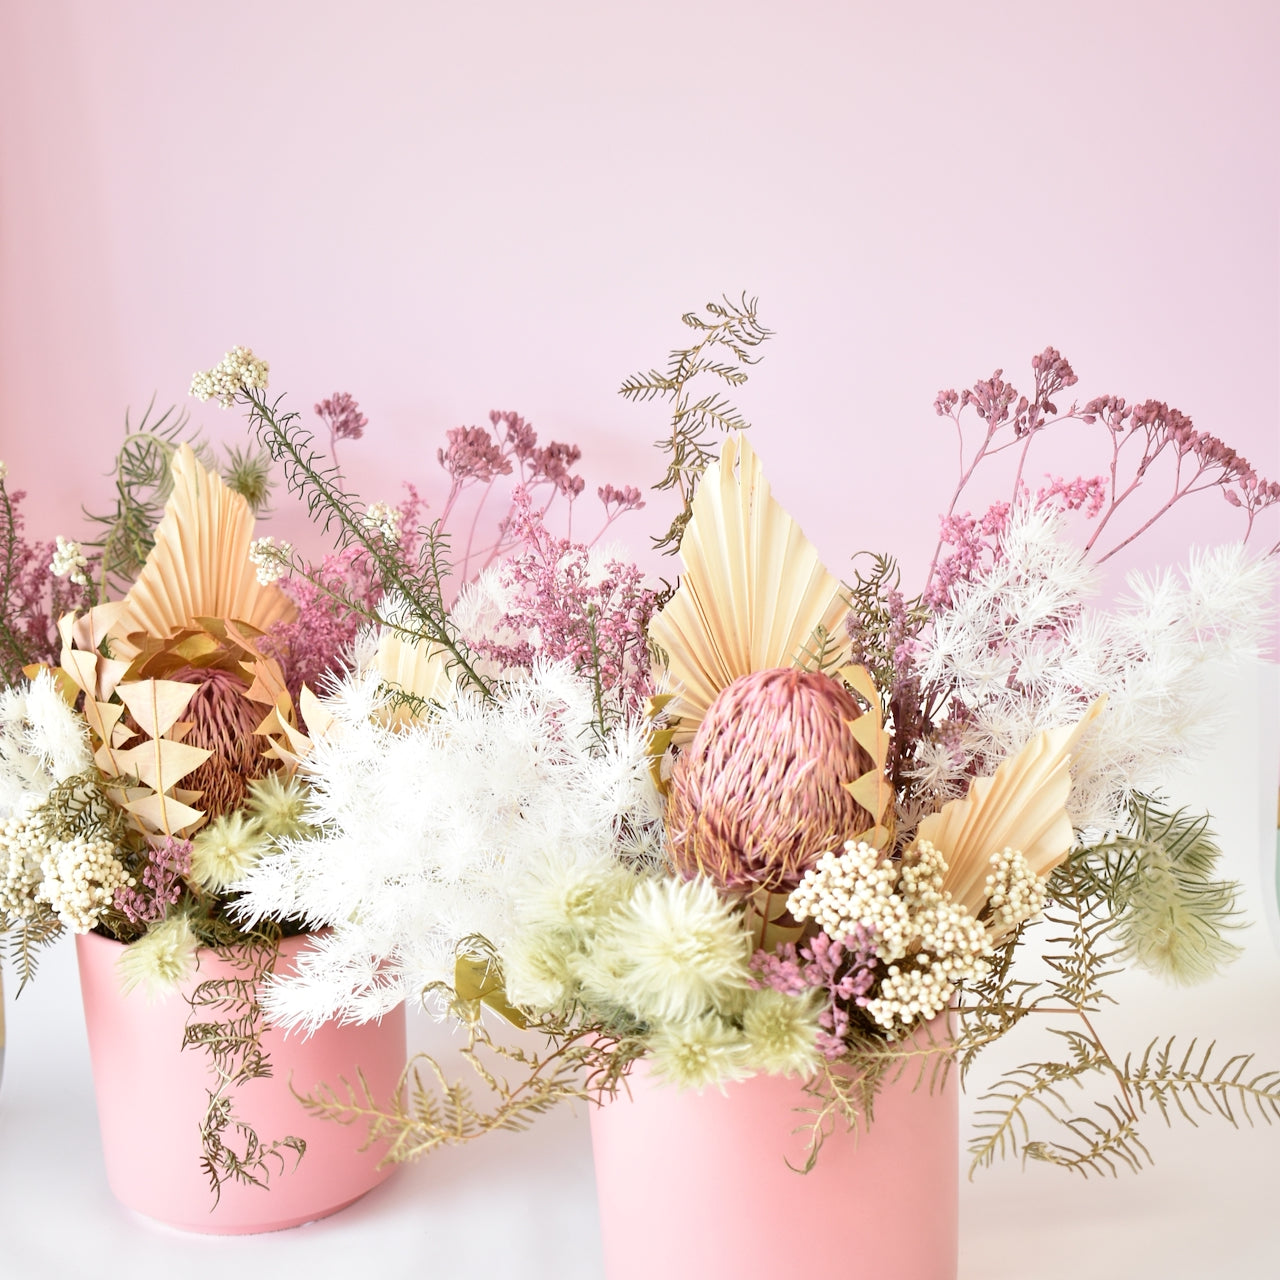 Lovely dried flower arrangement. White ferns, pink banksia, peach palm leaves with white rice flower in pink pot